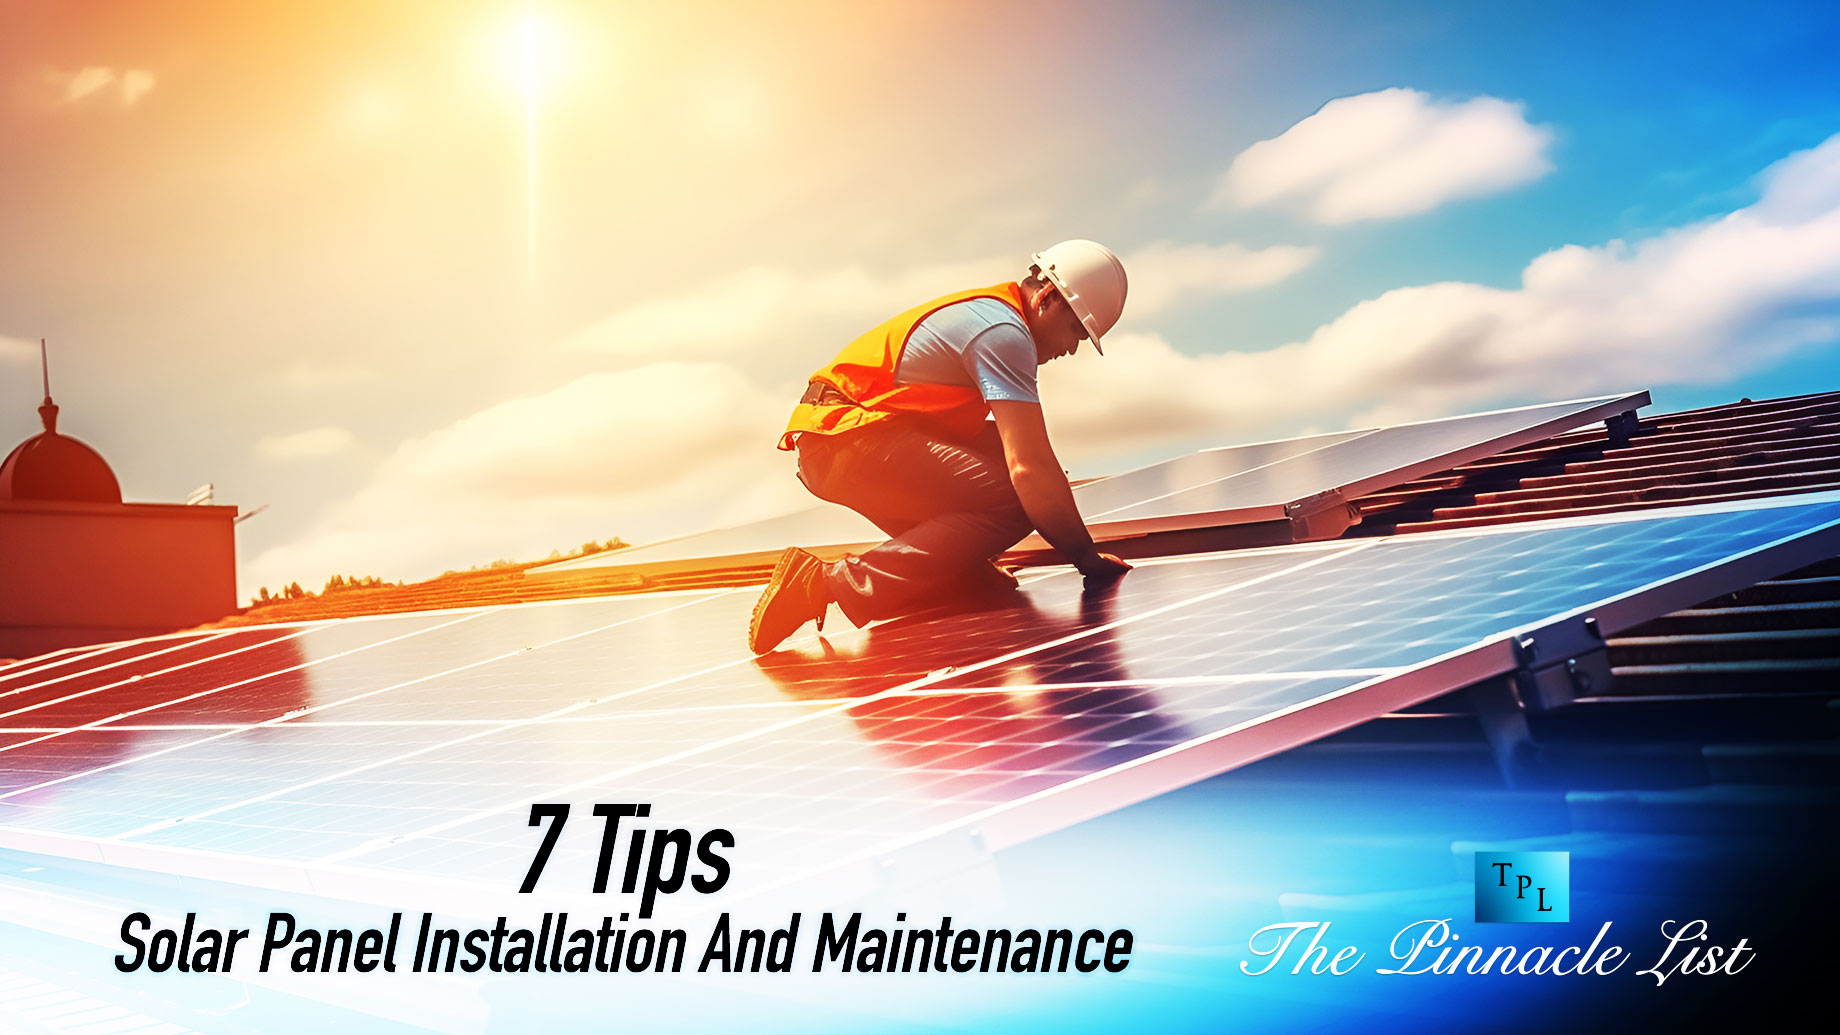 7 Tips For Solar Panel Installation And Maintenance